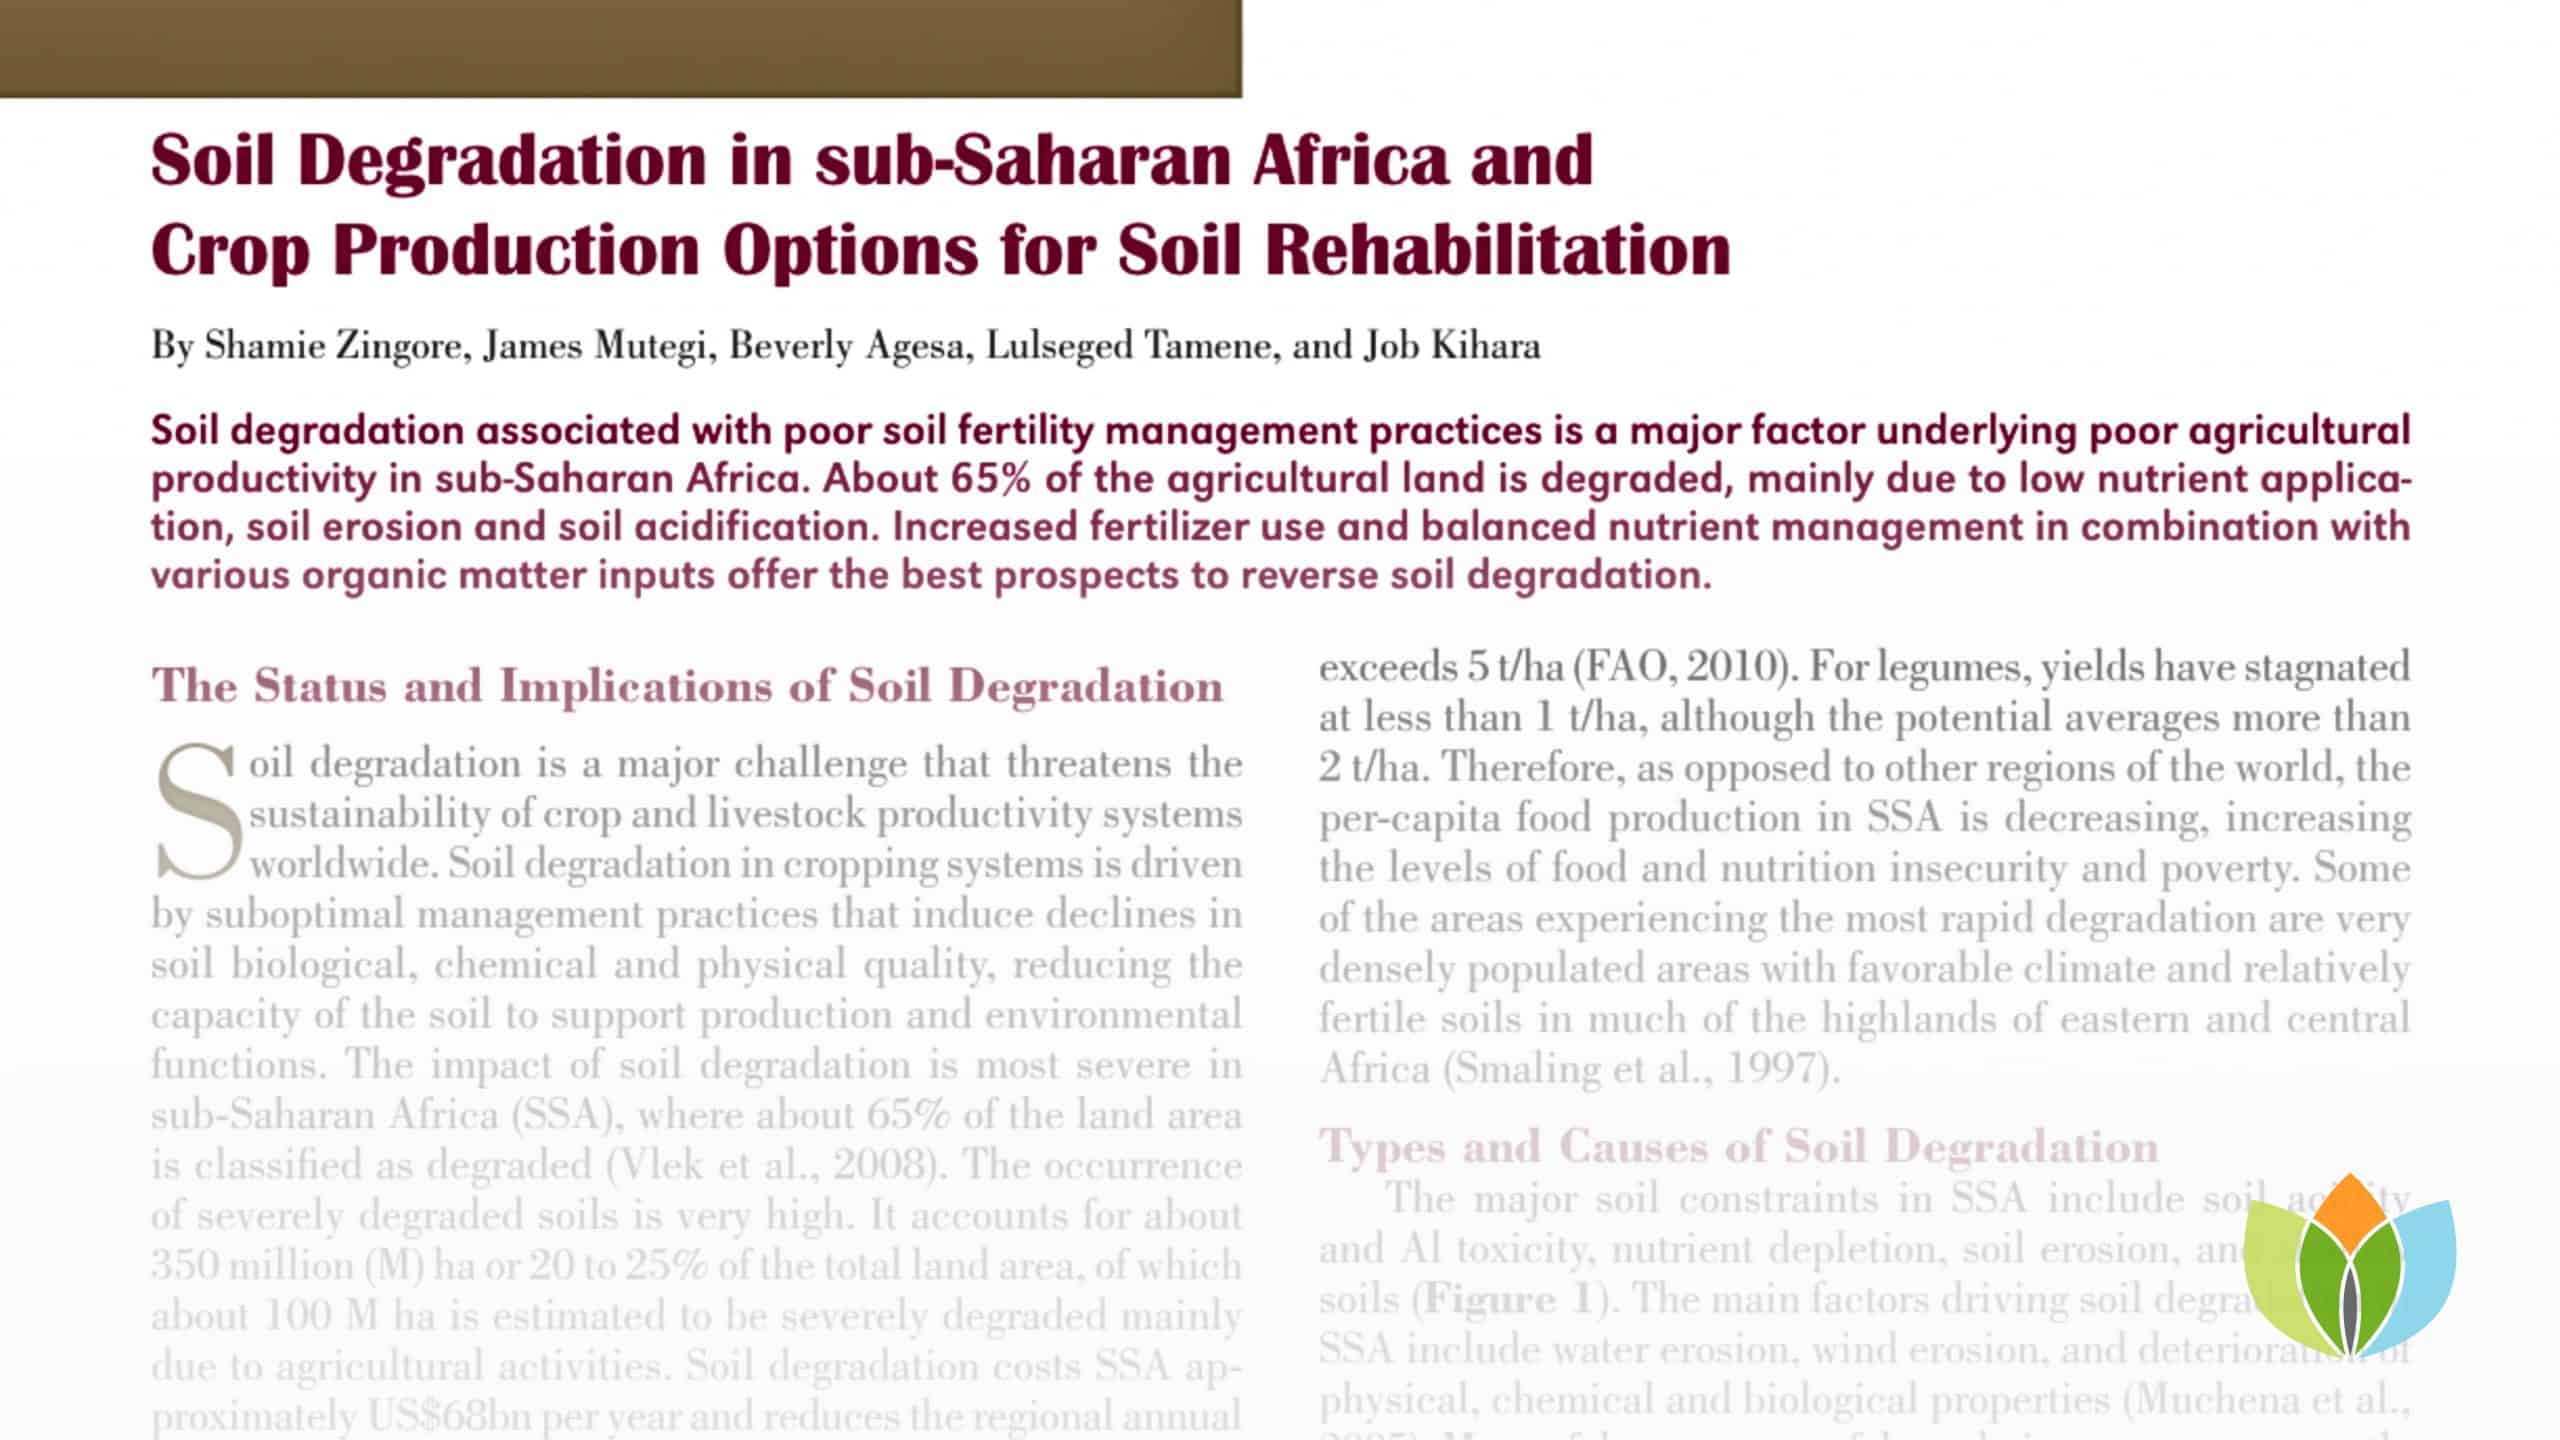 Soil Degradation in sub-Saharan Africa and Crop Production Options for Soil Rehabilitation